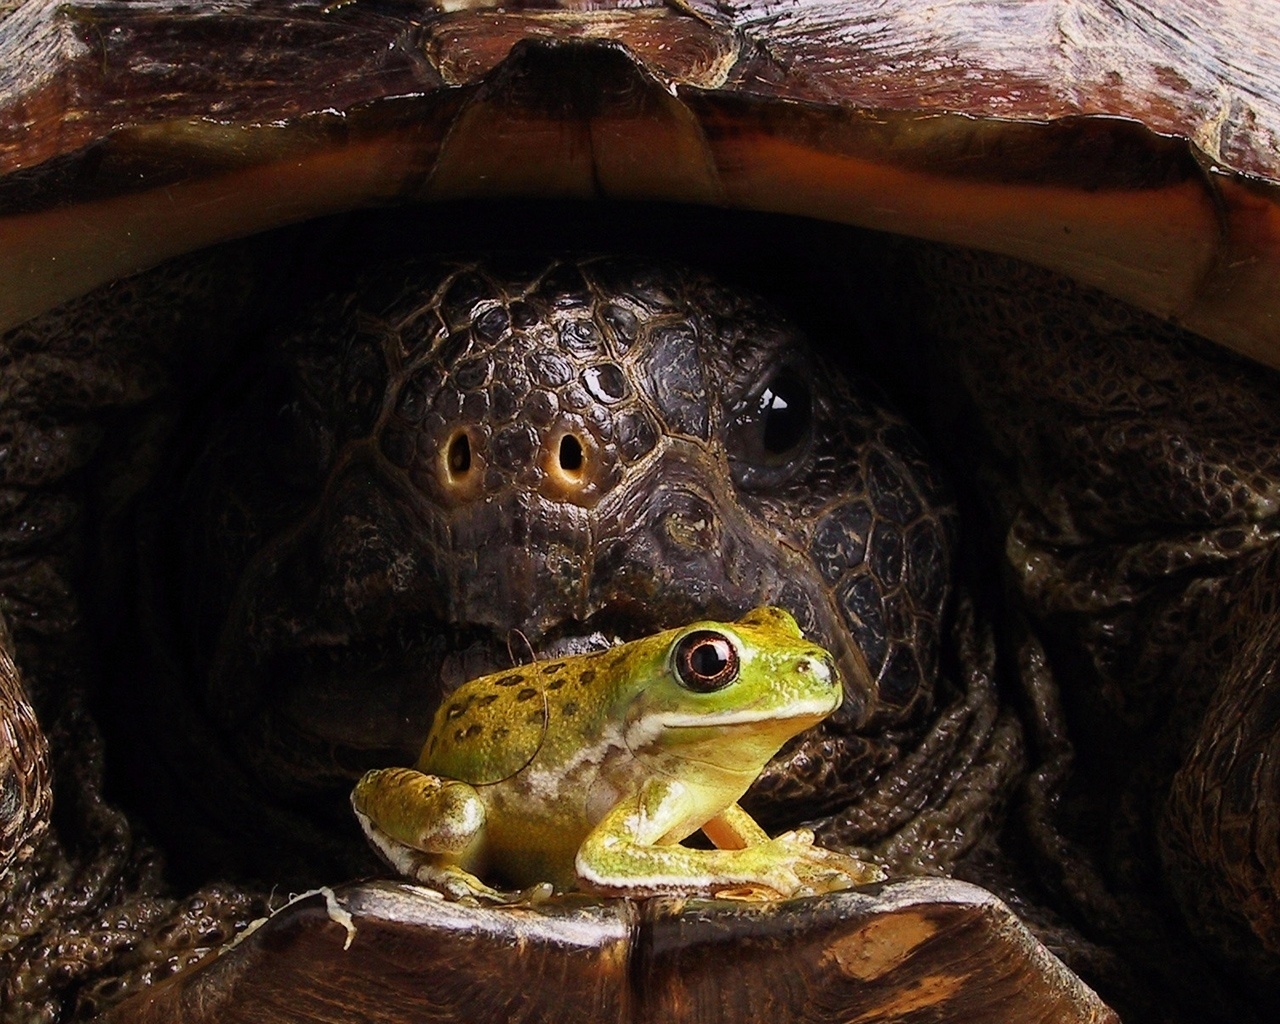 Big turtle and little frog for 1280 x 1024 resolution